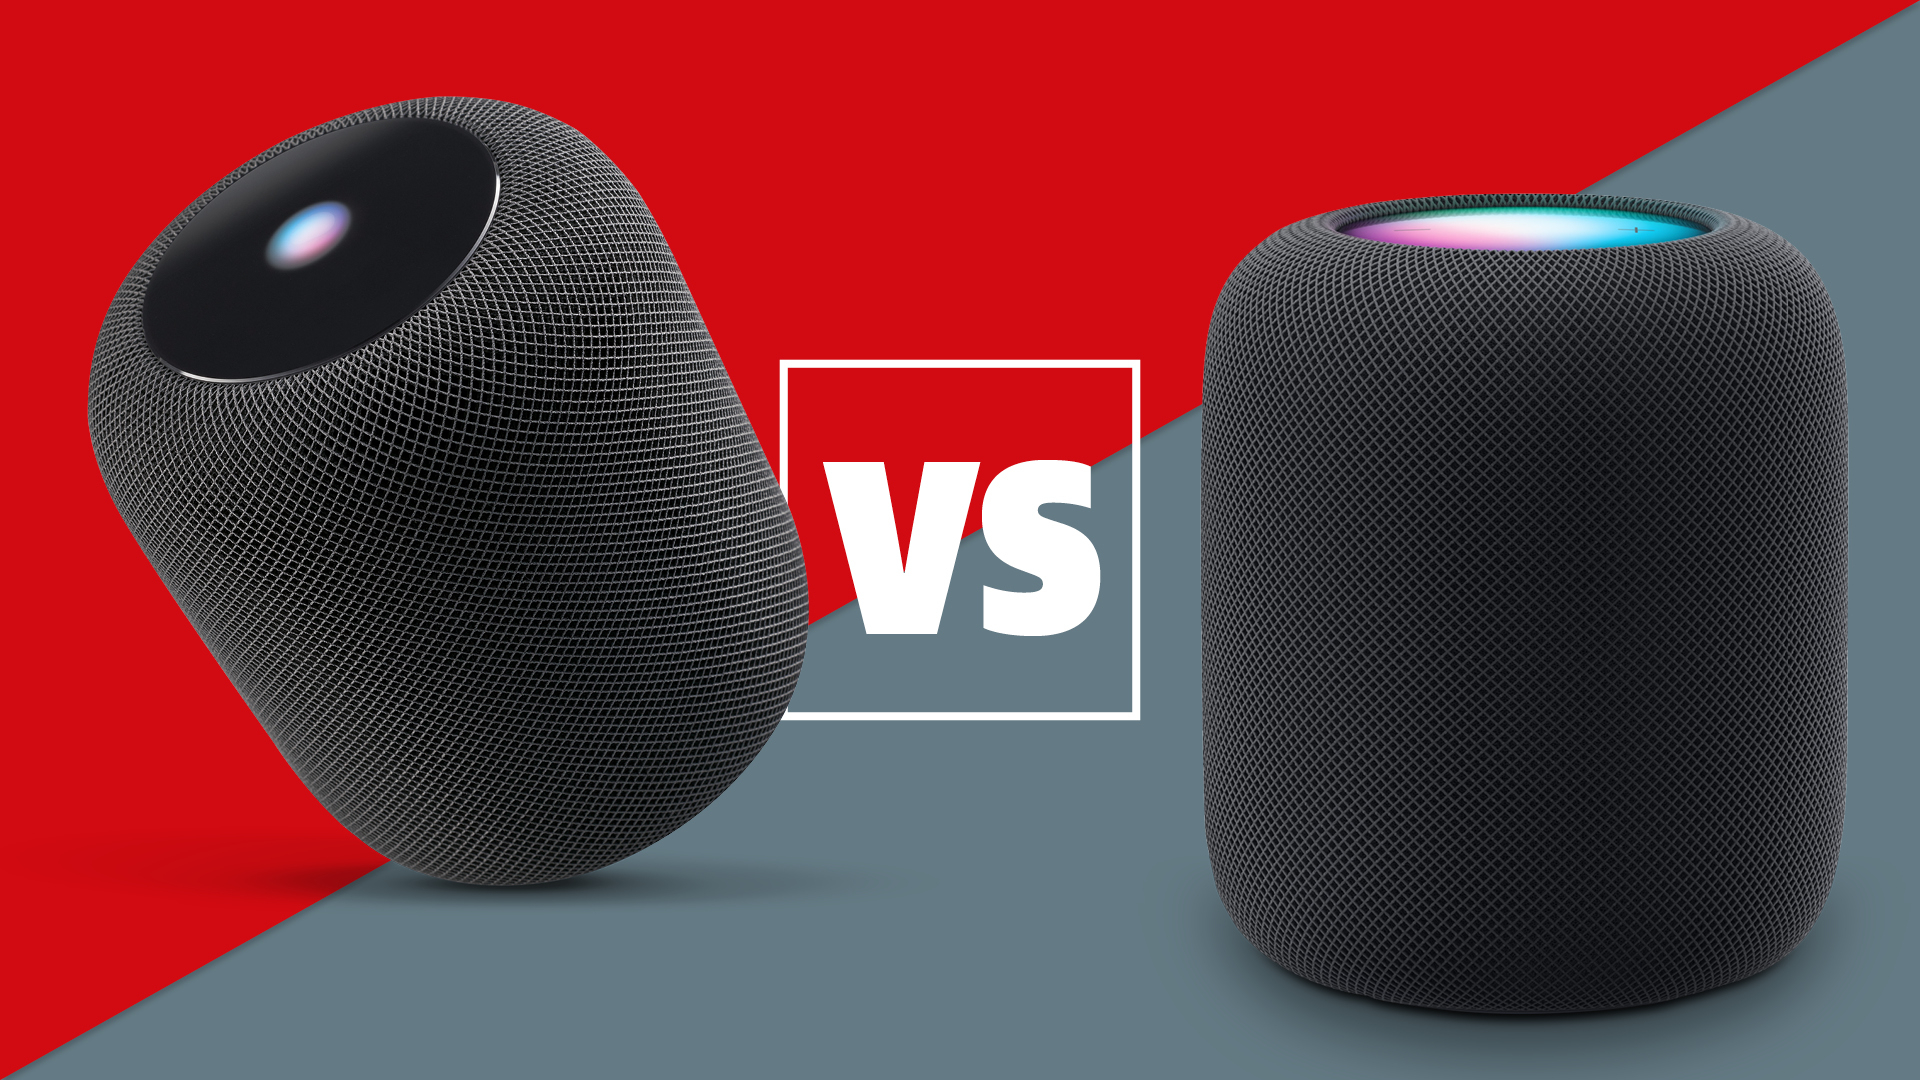 HomePod: Should You Buy? Features, Reviews and More